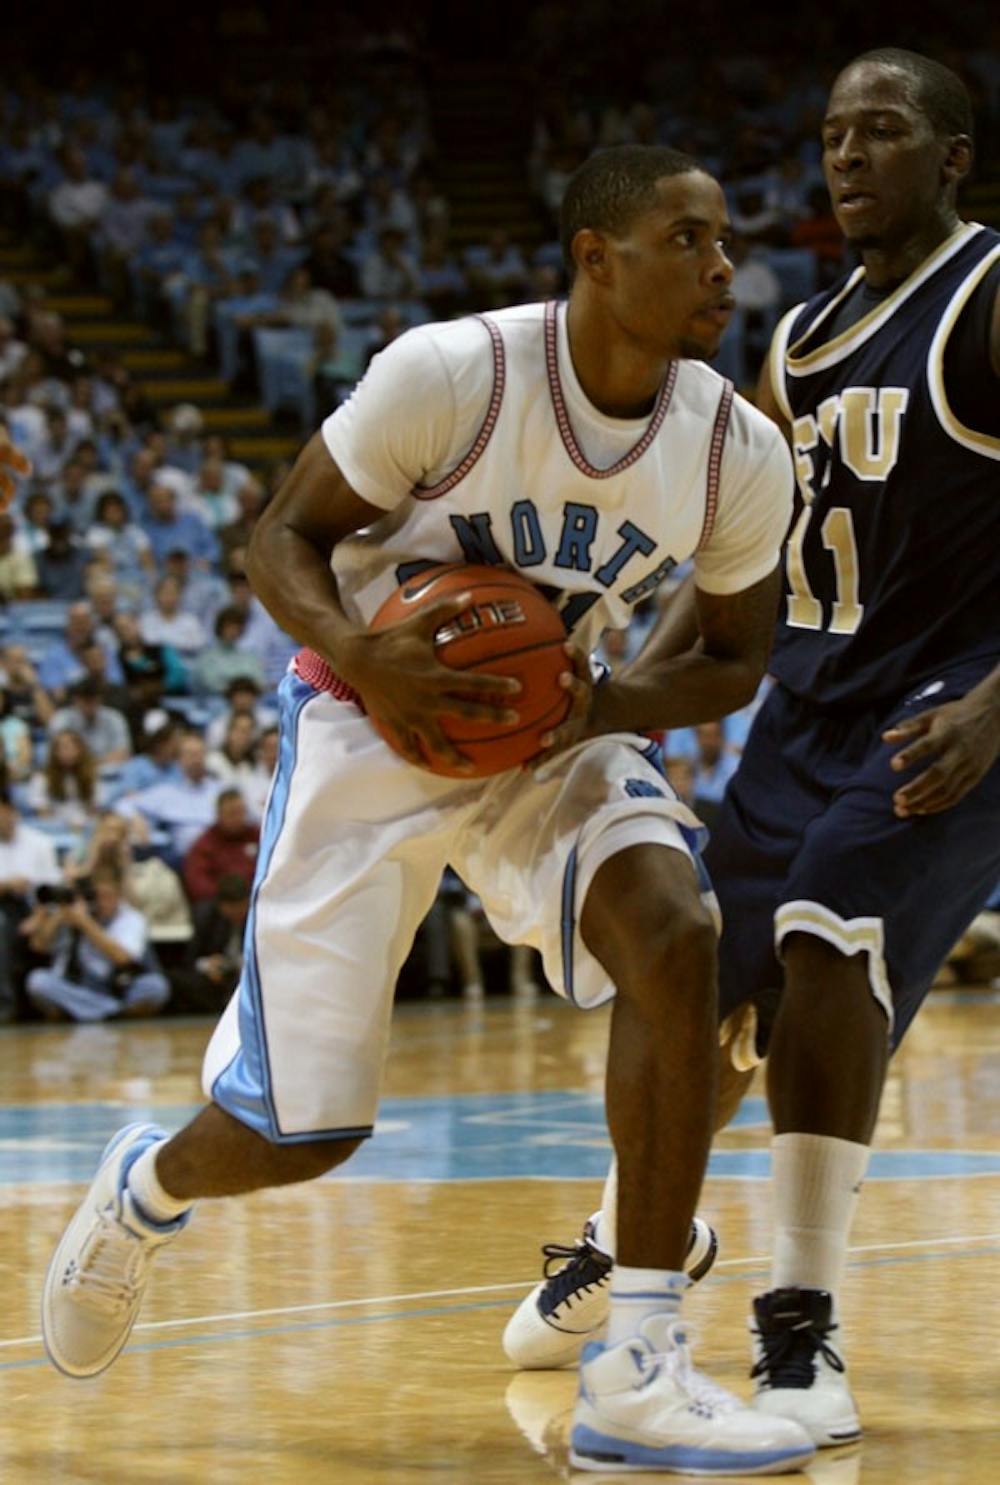 Sophomore Larry Drew II dished out six assists in UNC’s 88-72 win against FIU. DTH/Phong Dinh